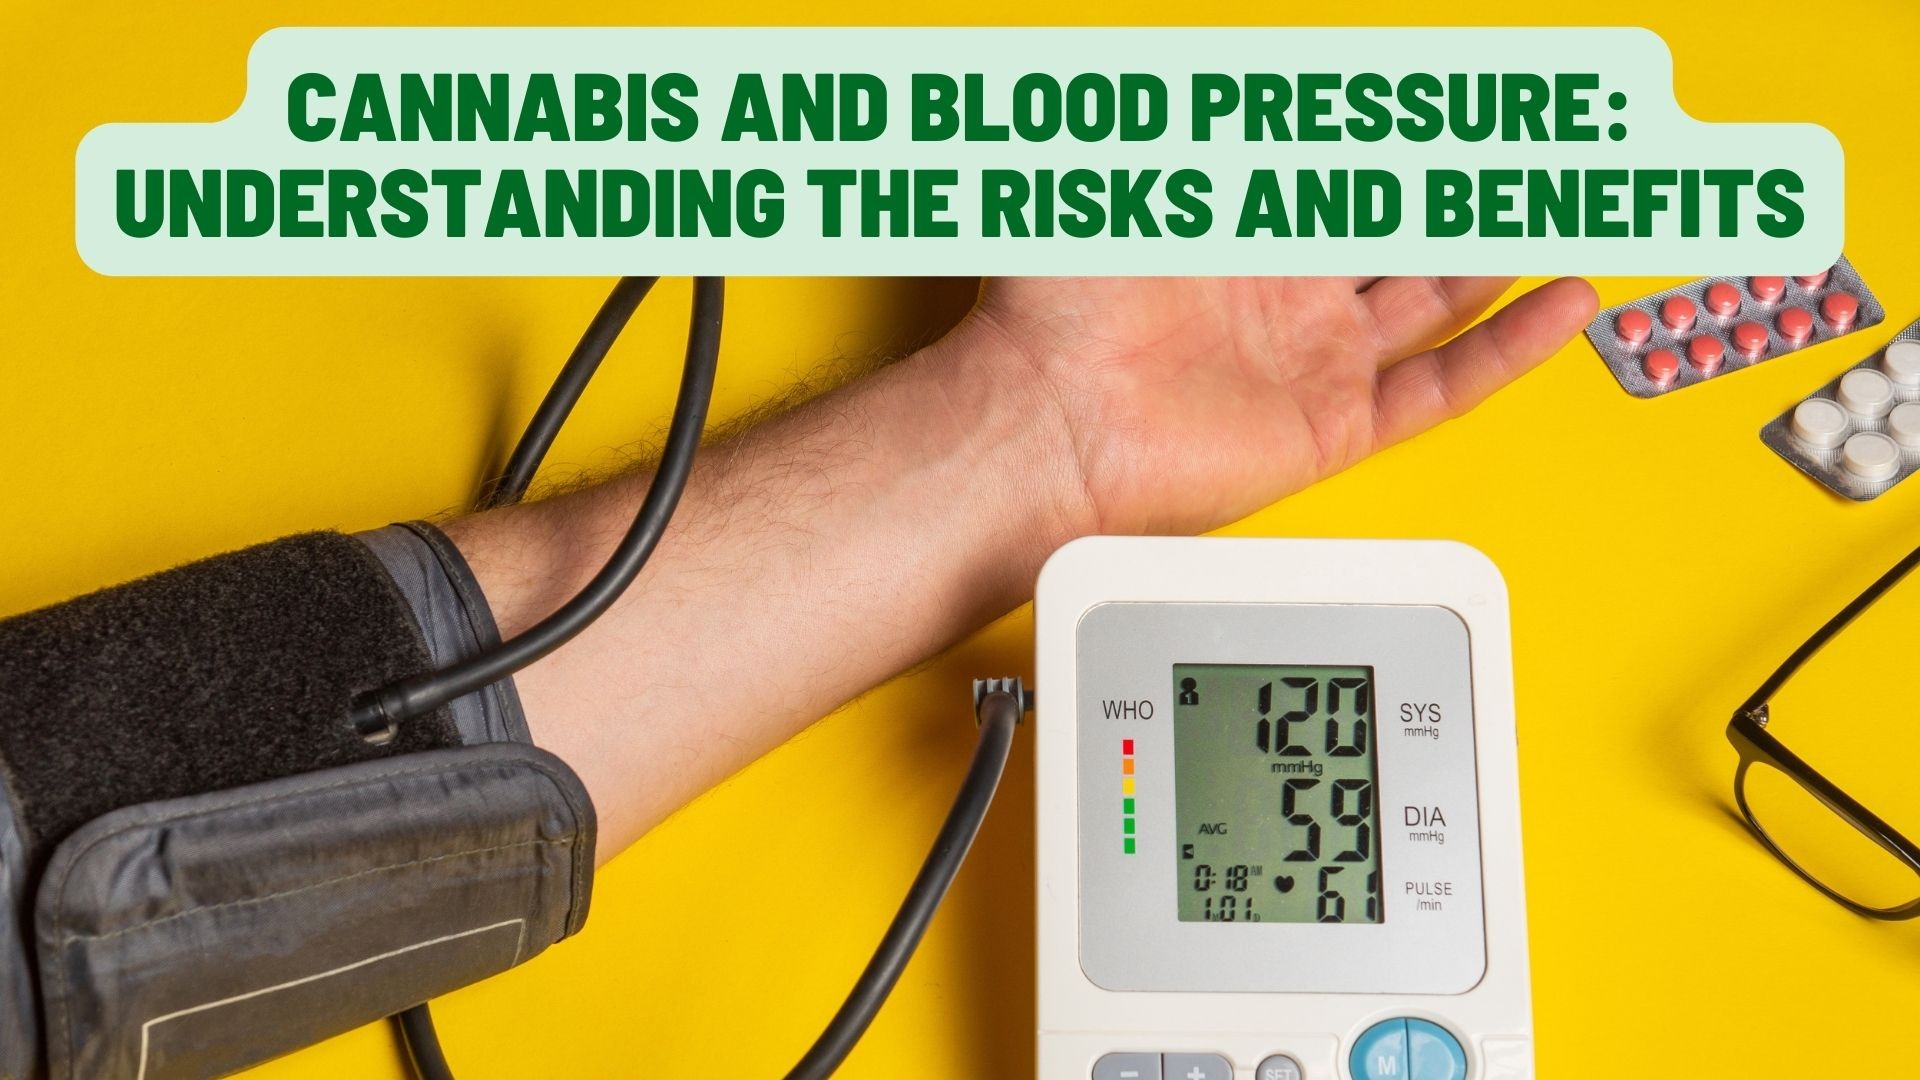 Cannabis and Blood Pressure: Understanding the Risks and Benefits